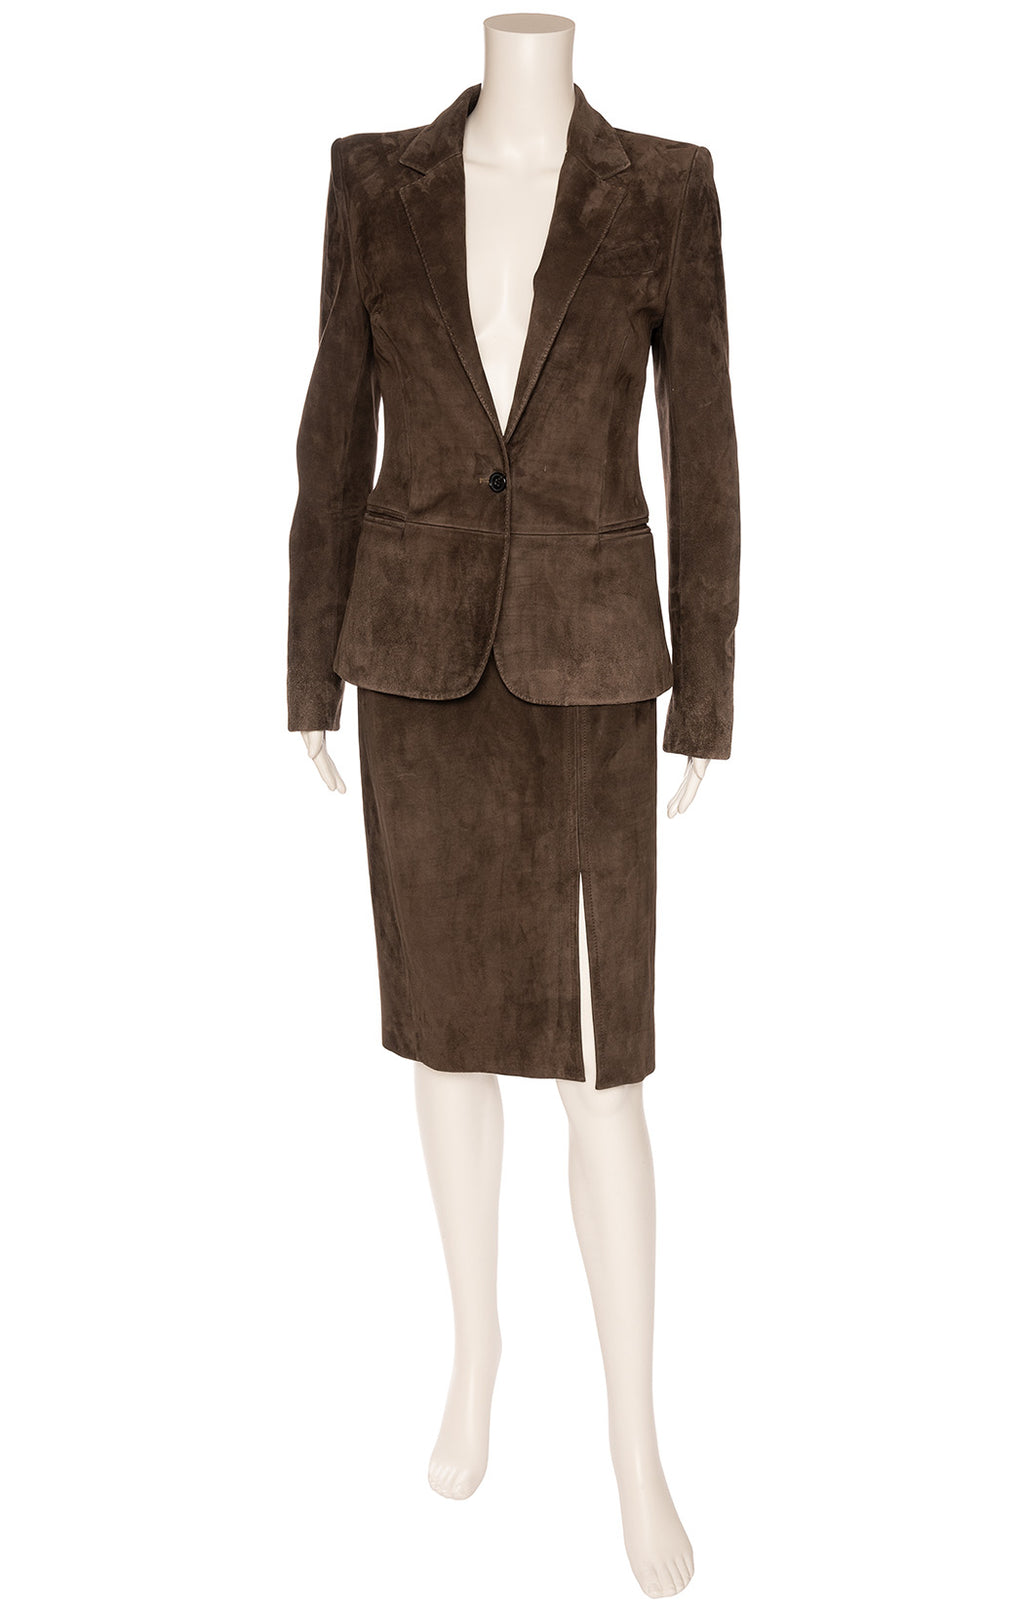 TOM FORD  Suit Size: Blazer IT 38 (comparable to US 2) Skirt: IT 42 (comparable to US 4-6) with tags  Price $5,995